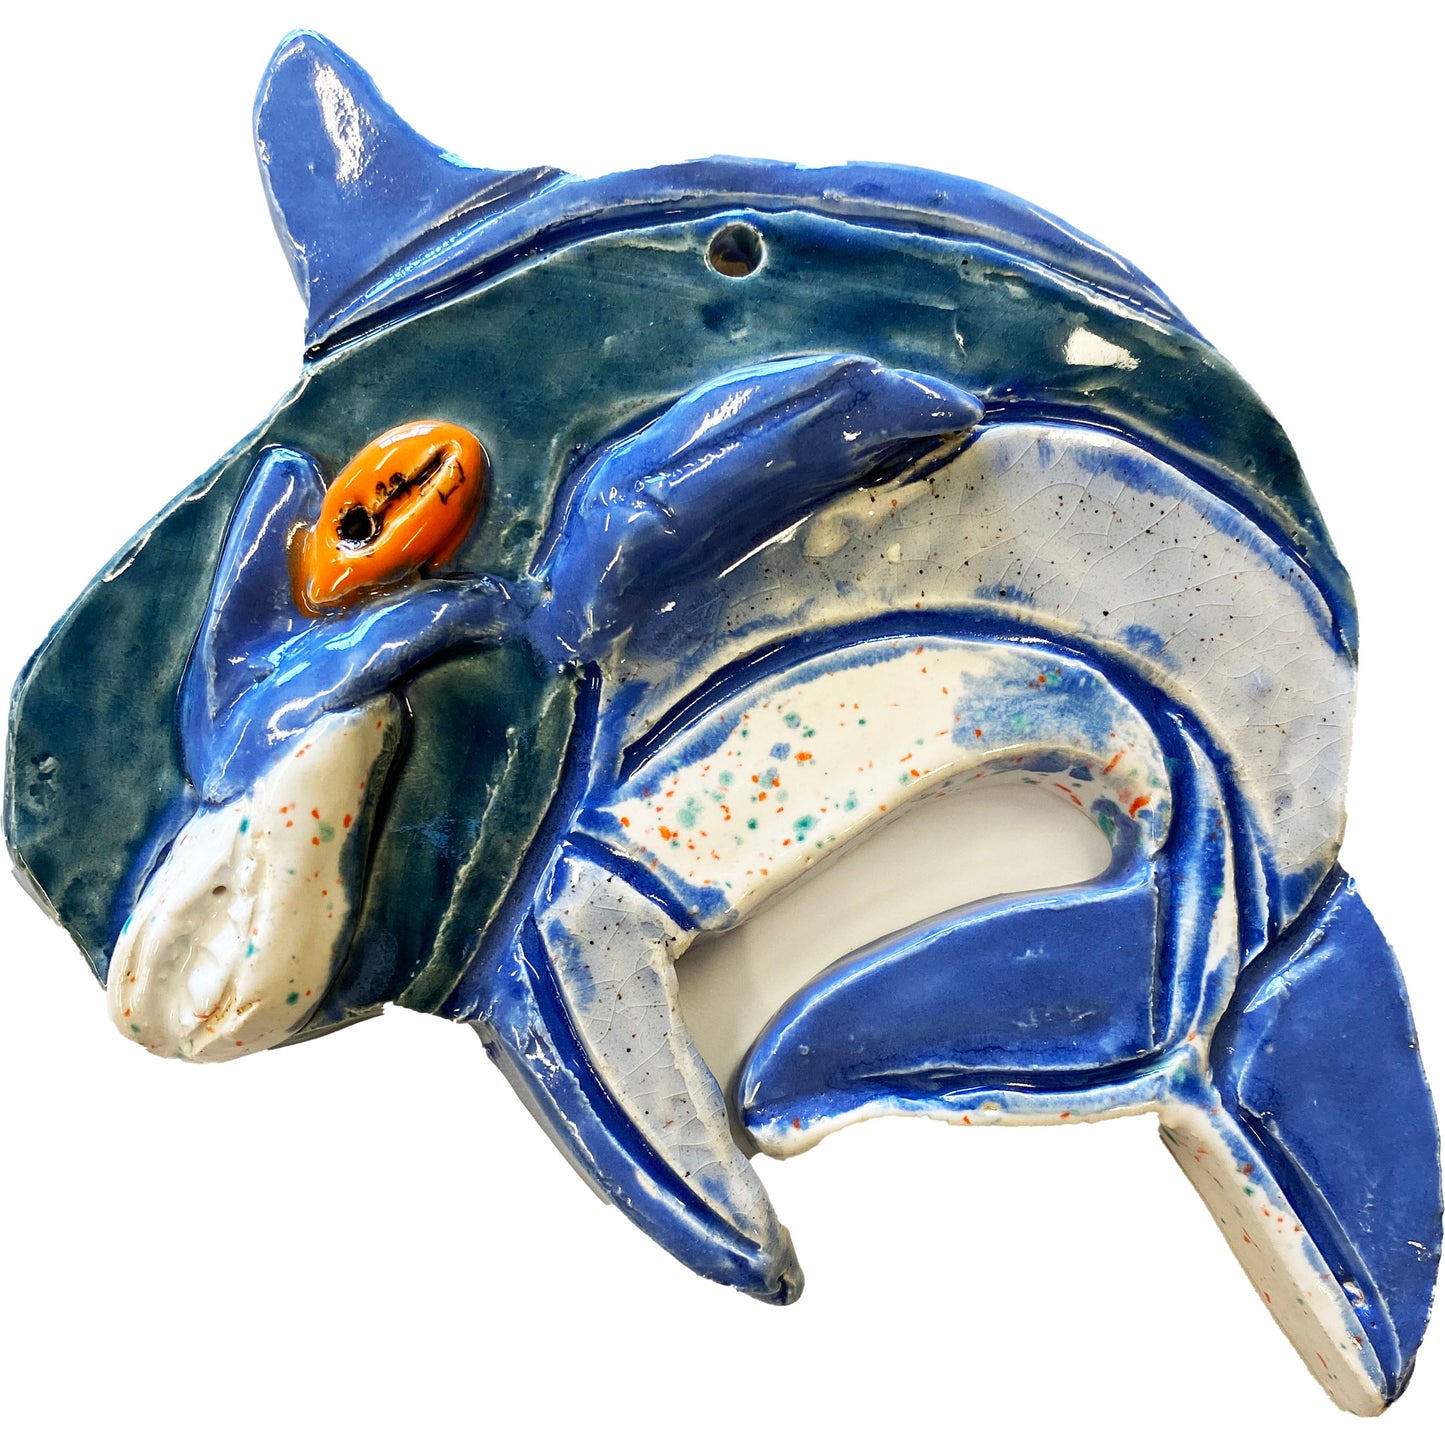 Ceramic Arts Handmade Clay Crafts Fresh Fish Glazed 6-inch x 5-inch Dolphin made by Lukas Miller